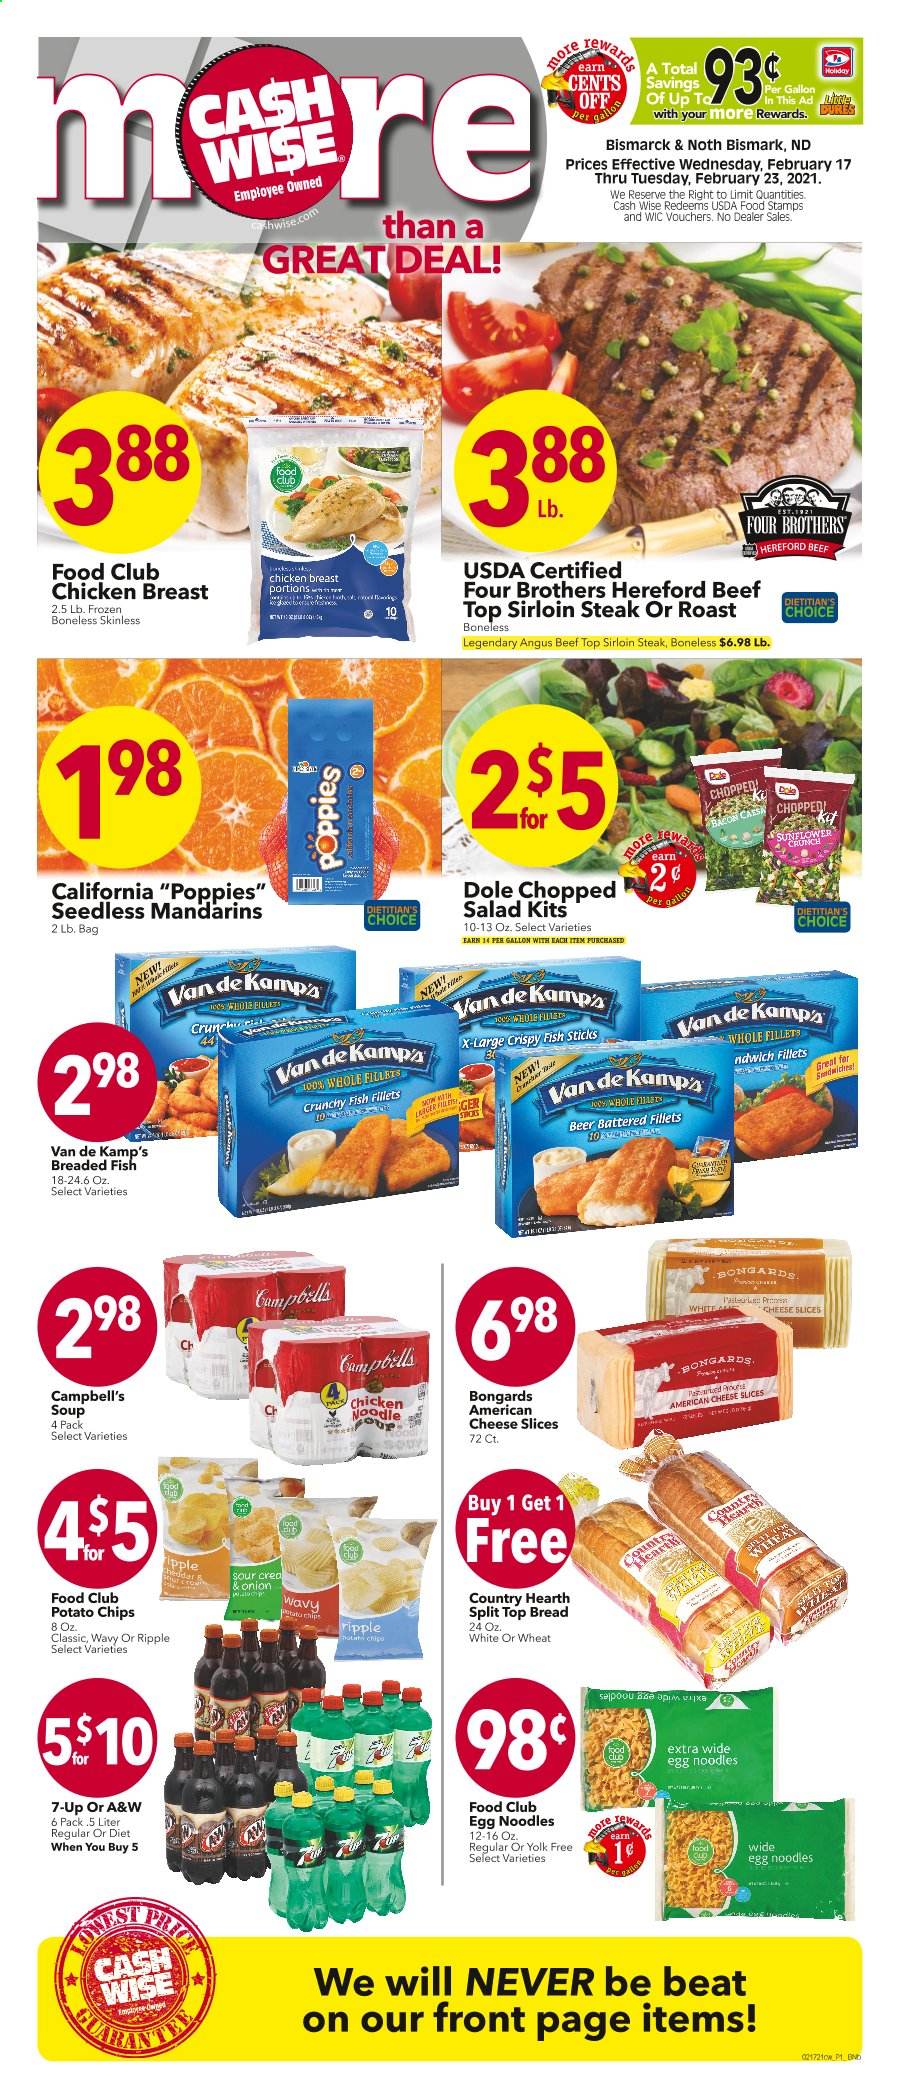 thumbnail - Cash Wise Flyer - 02/17/2021 - 02/23/2021 - Sales products - Dole, bread, fish, Van de Kamp's, Campbell's, chicken roast, soup, salad, breaded fish, fish sticks, Four Brothers, american cheese, sliced cheese, cheese, potato chips, mandarines, egg noodles, noodles, 7UP, A&W, beer, chicken breasts, beef meat, beef sirloin, steak, sirloin steak. Page 1.